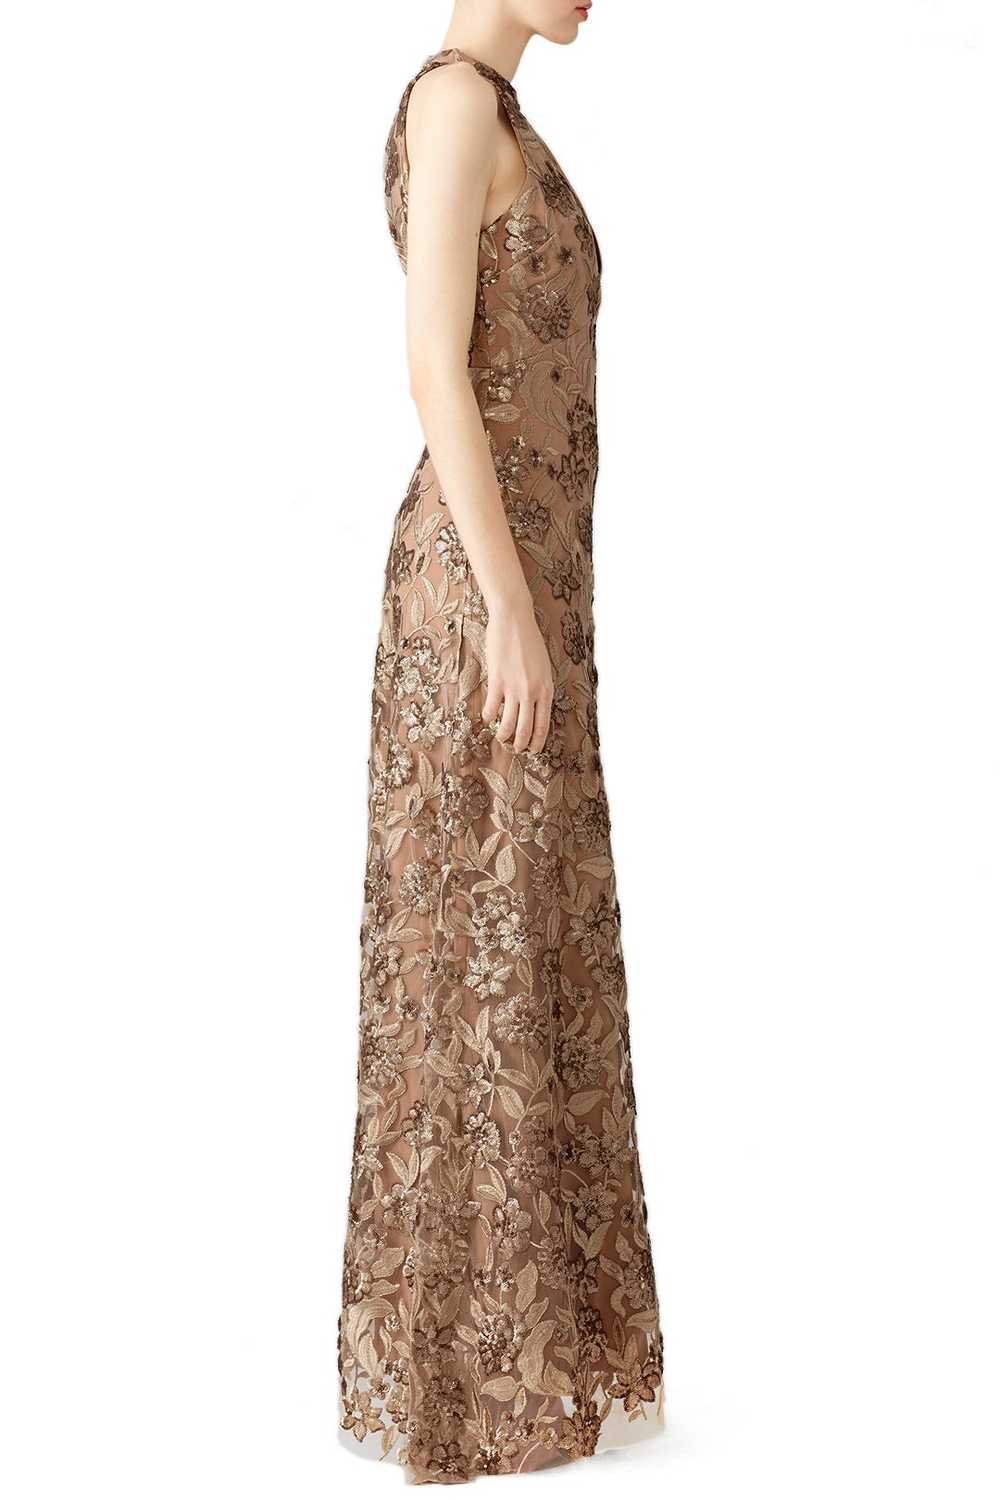 ERIN erin fetherston Gold Joan Gown - image 3